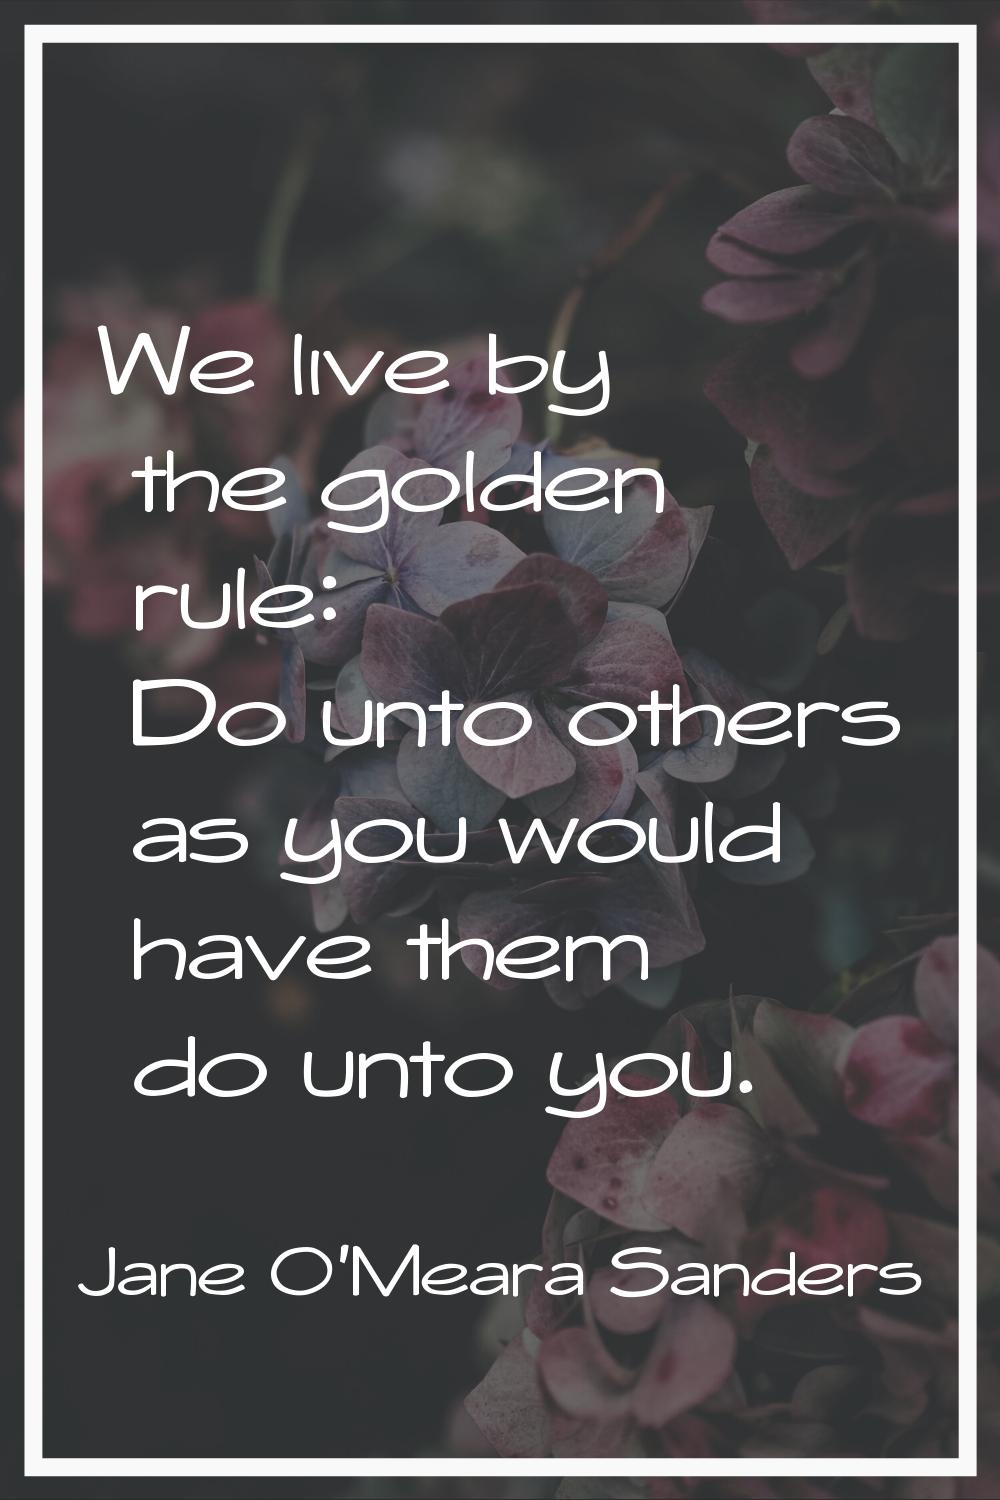 We live by the golden rule: Do unto others as you would have them do unto you.